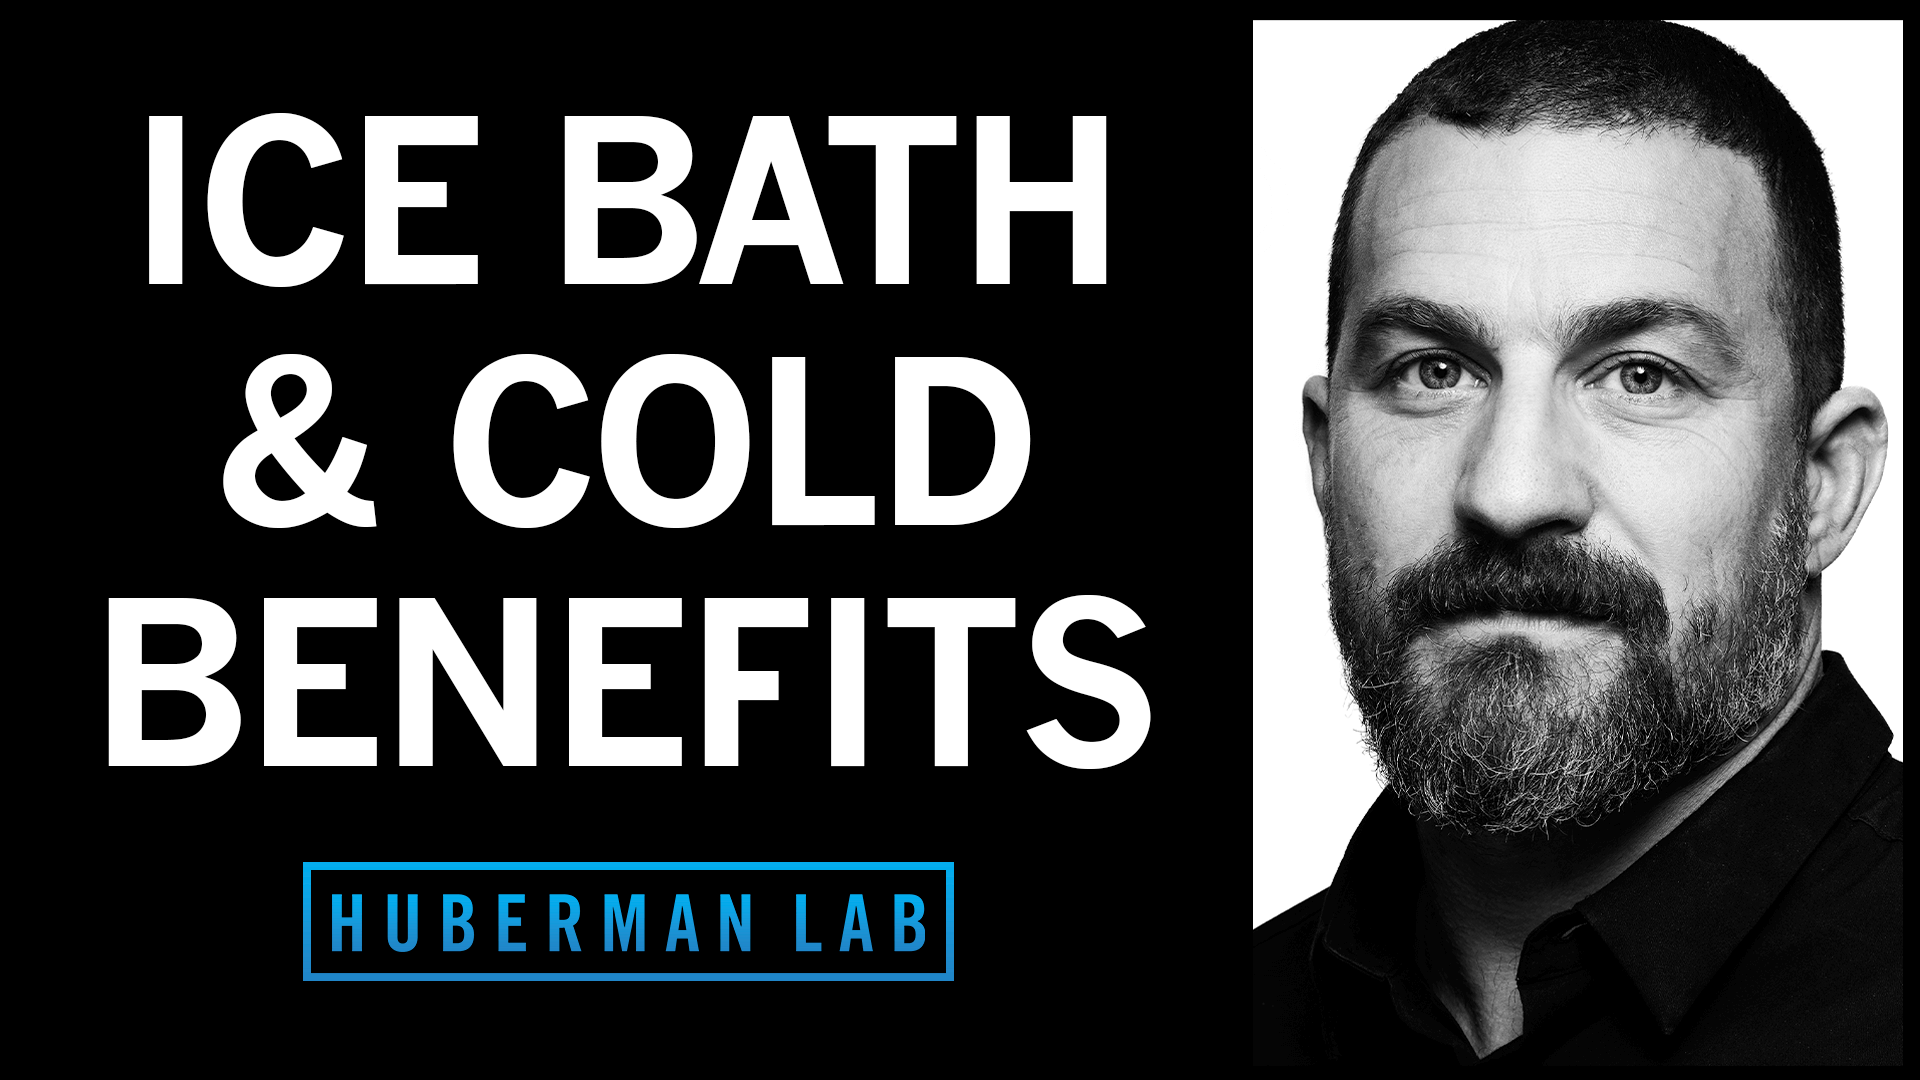 Benefits of cold showers, according to doctors